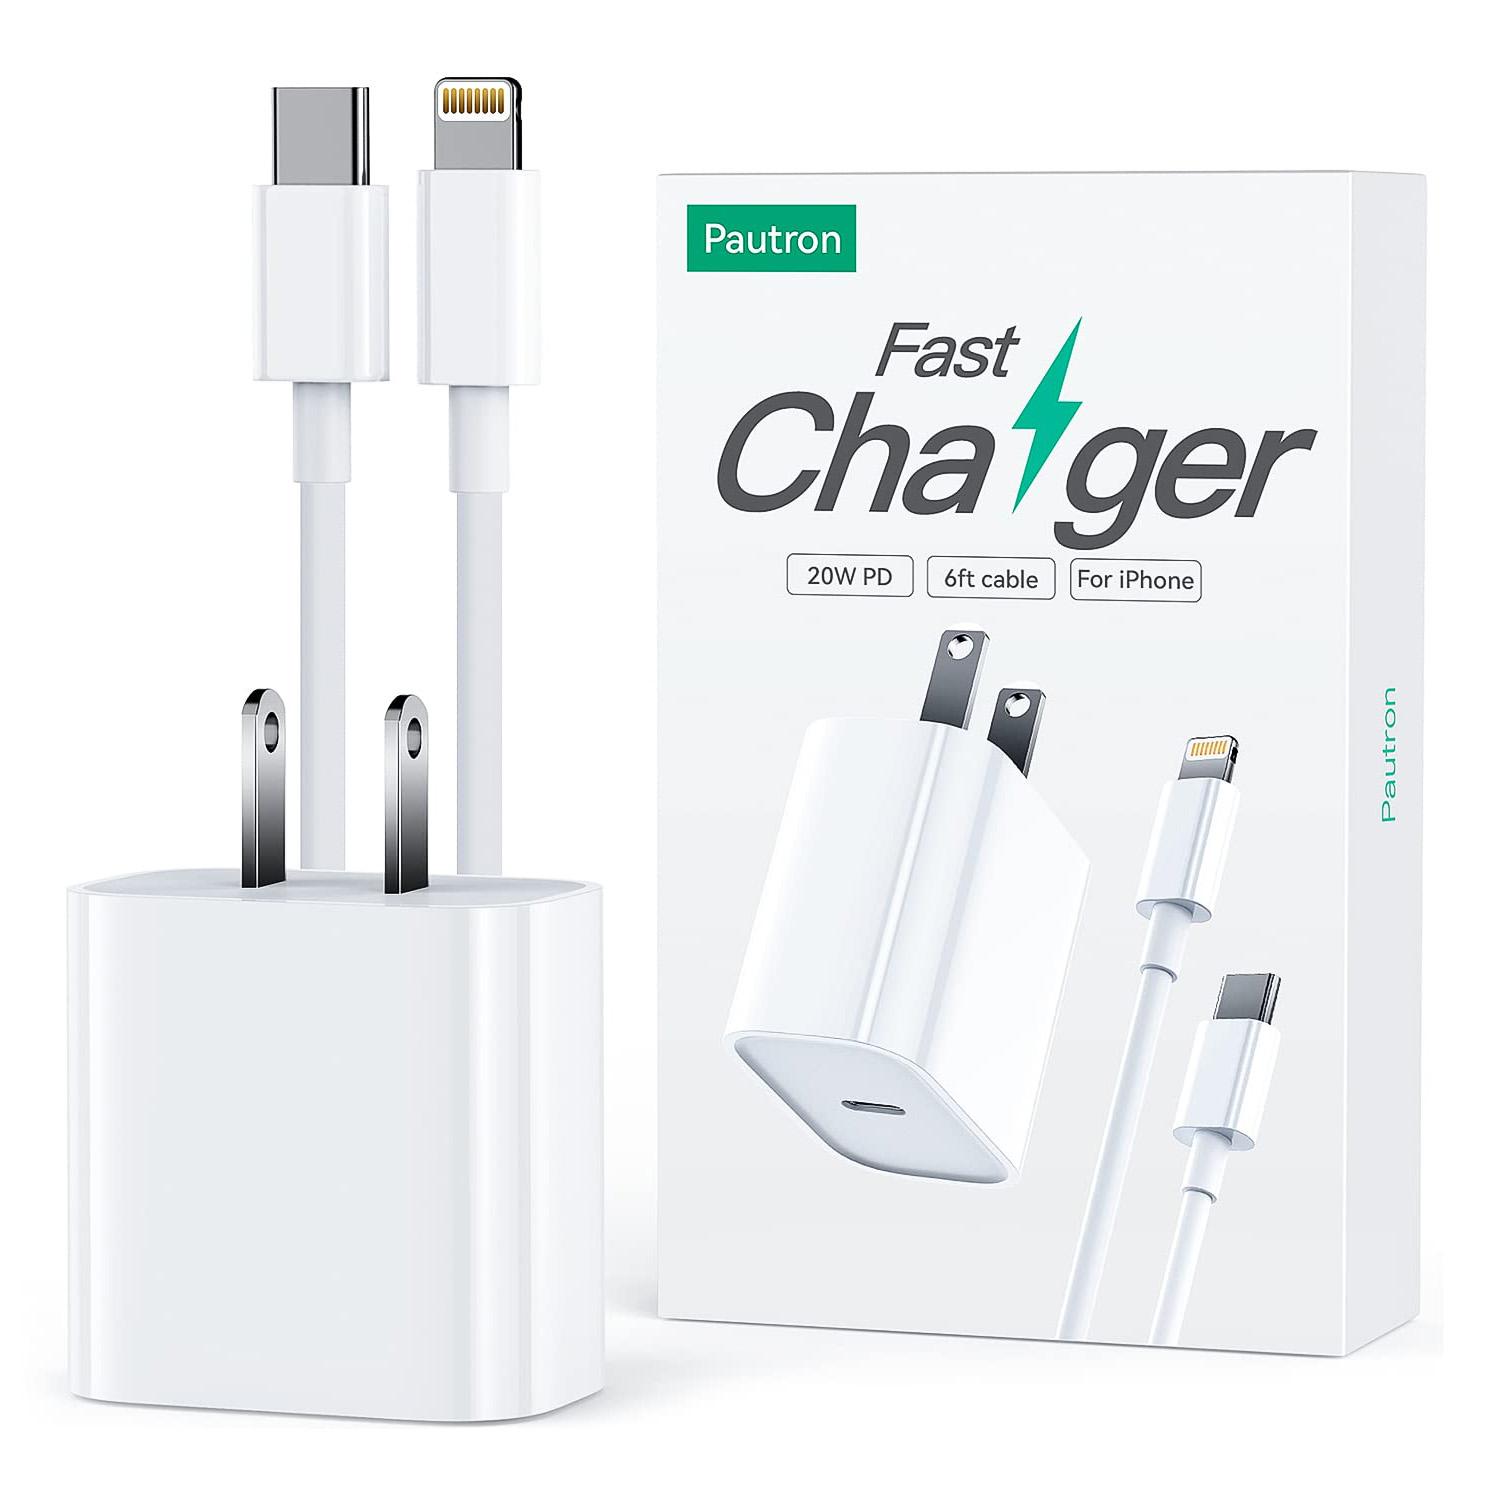 iPhone Charger 20W Wall Charger and 6Ft Lightning Cable for $7.50